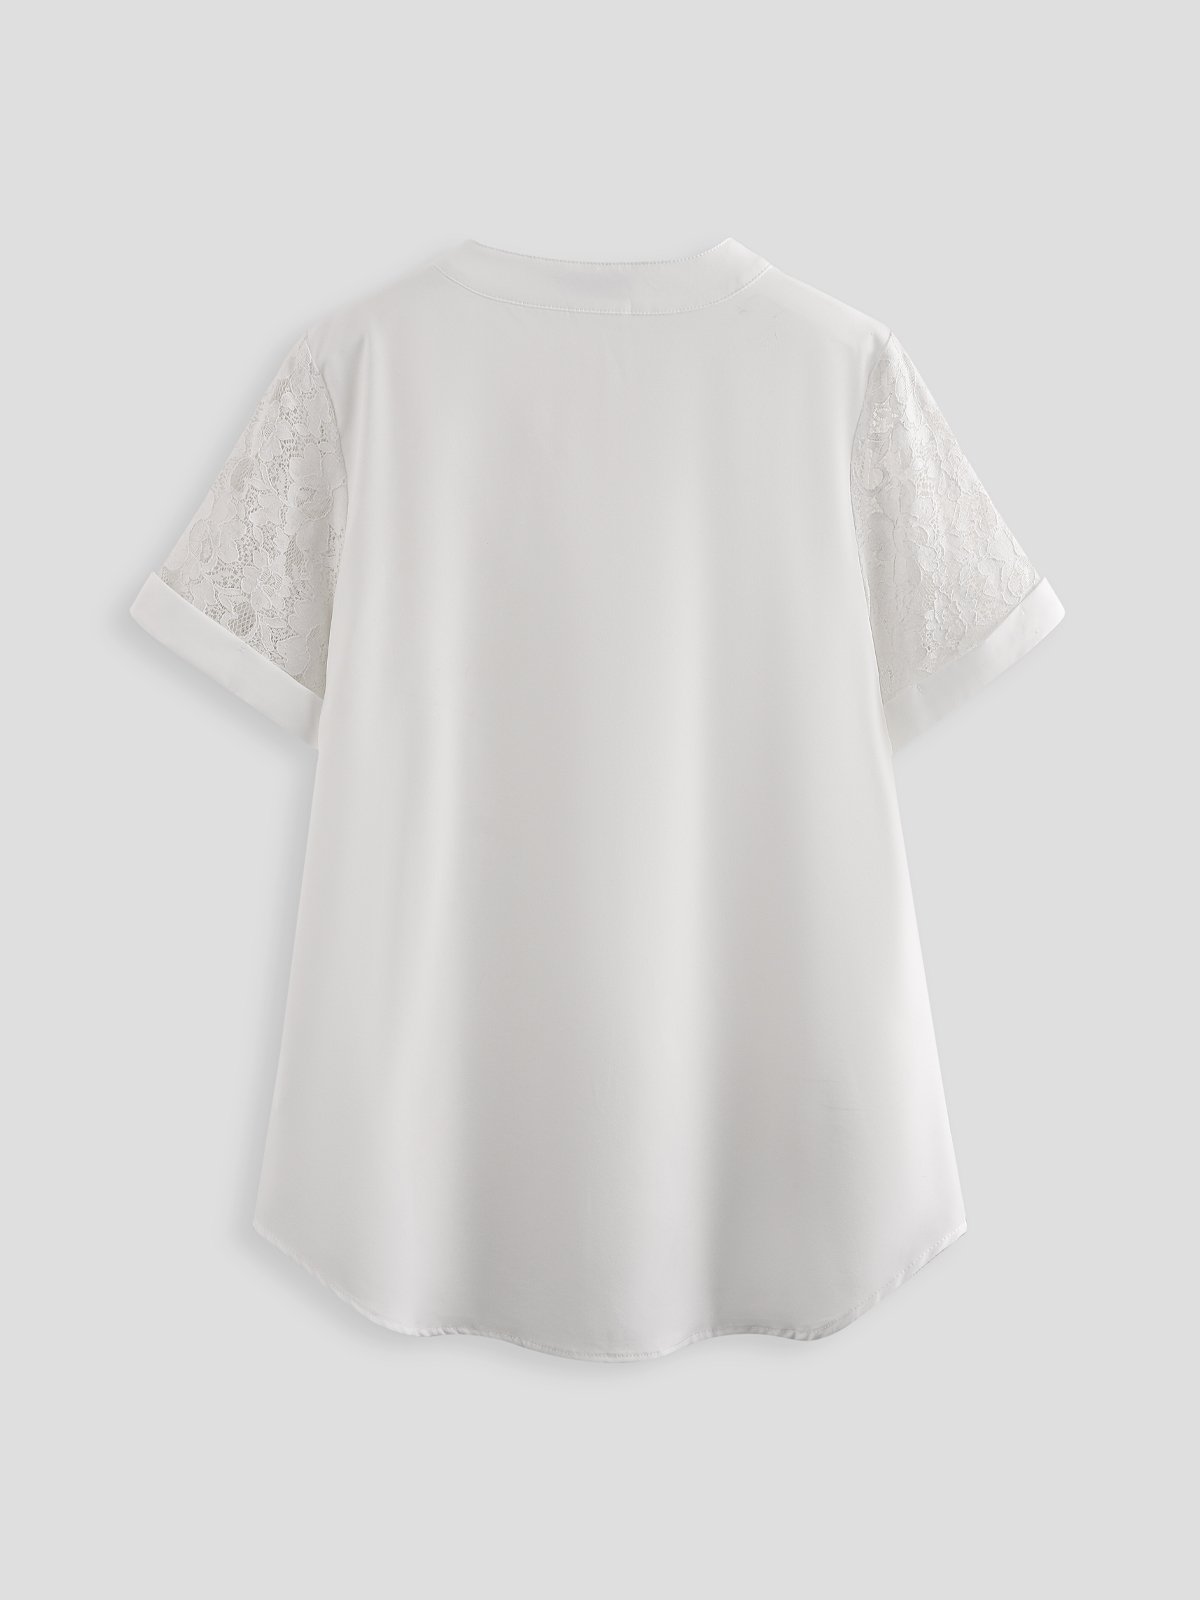 JFN V Neck Lace Cut-Out Basic T-Shirt/Tee